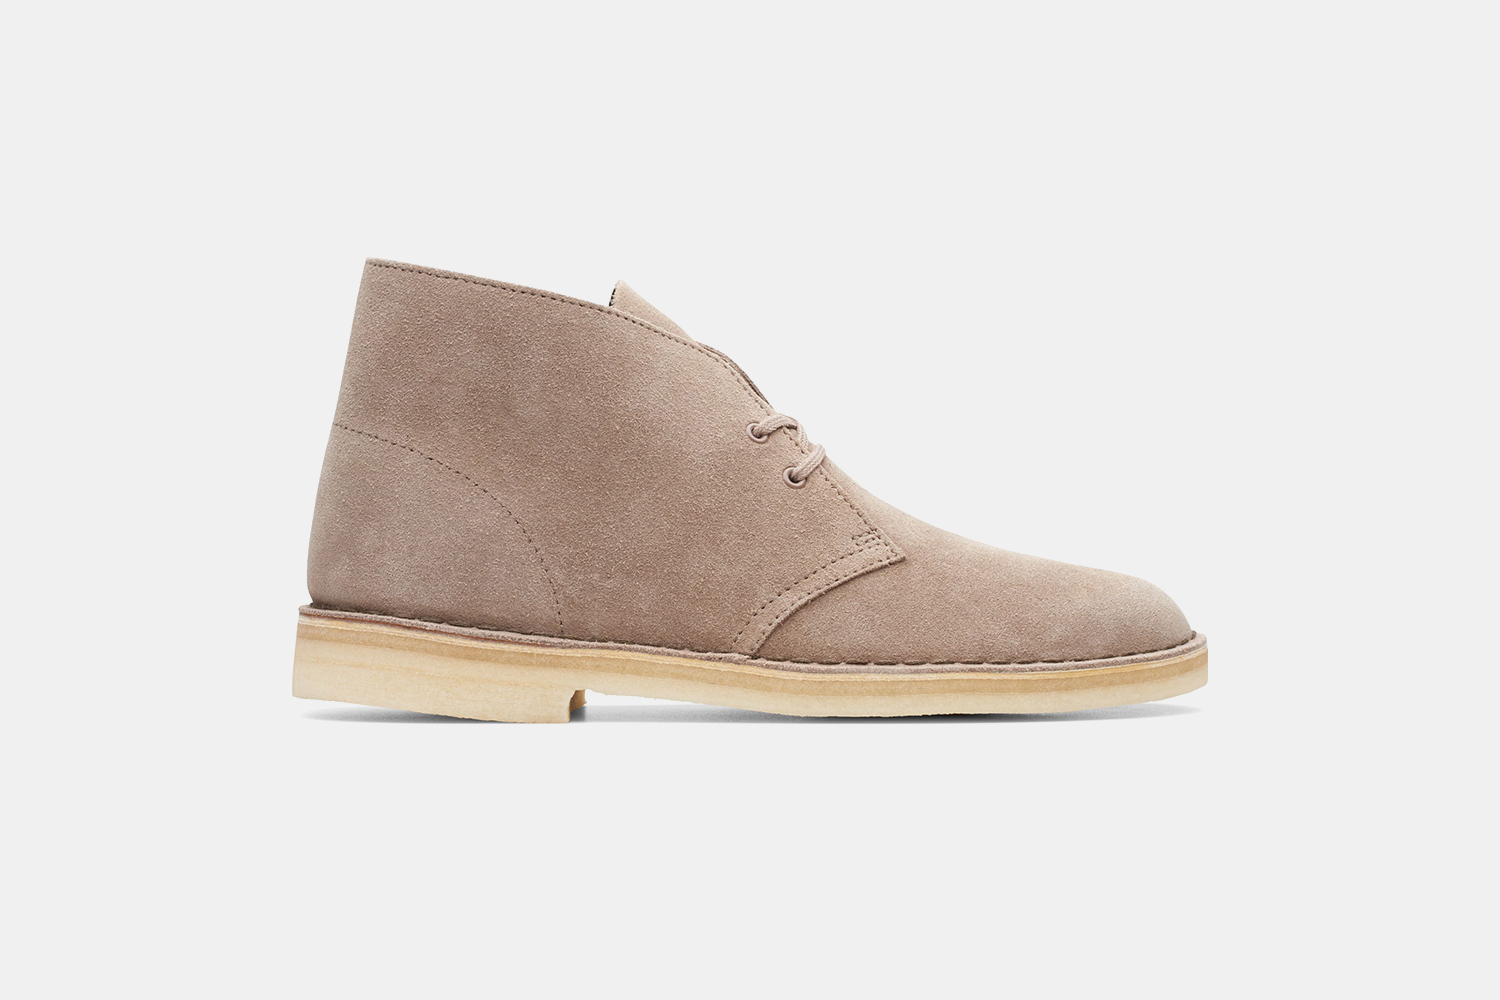 Deal: These Iconic Clarks Desert Boots 